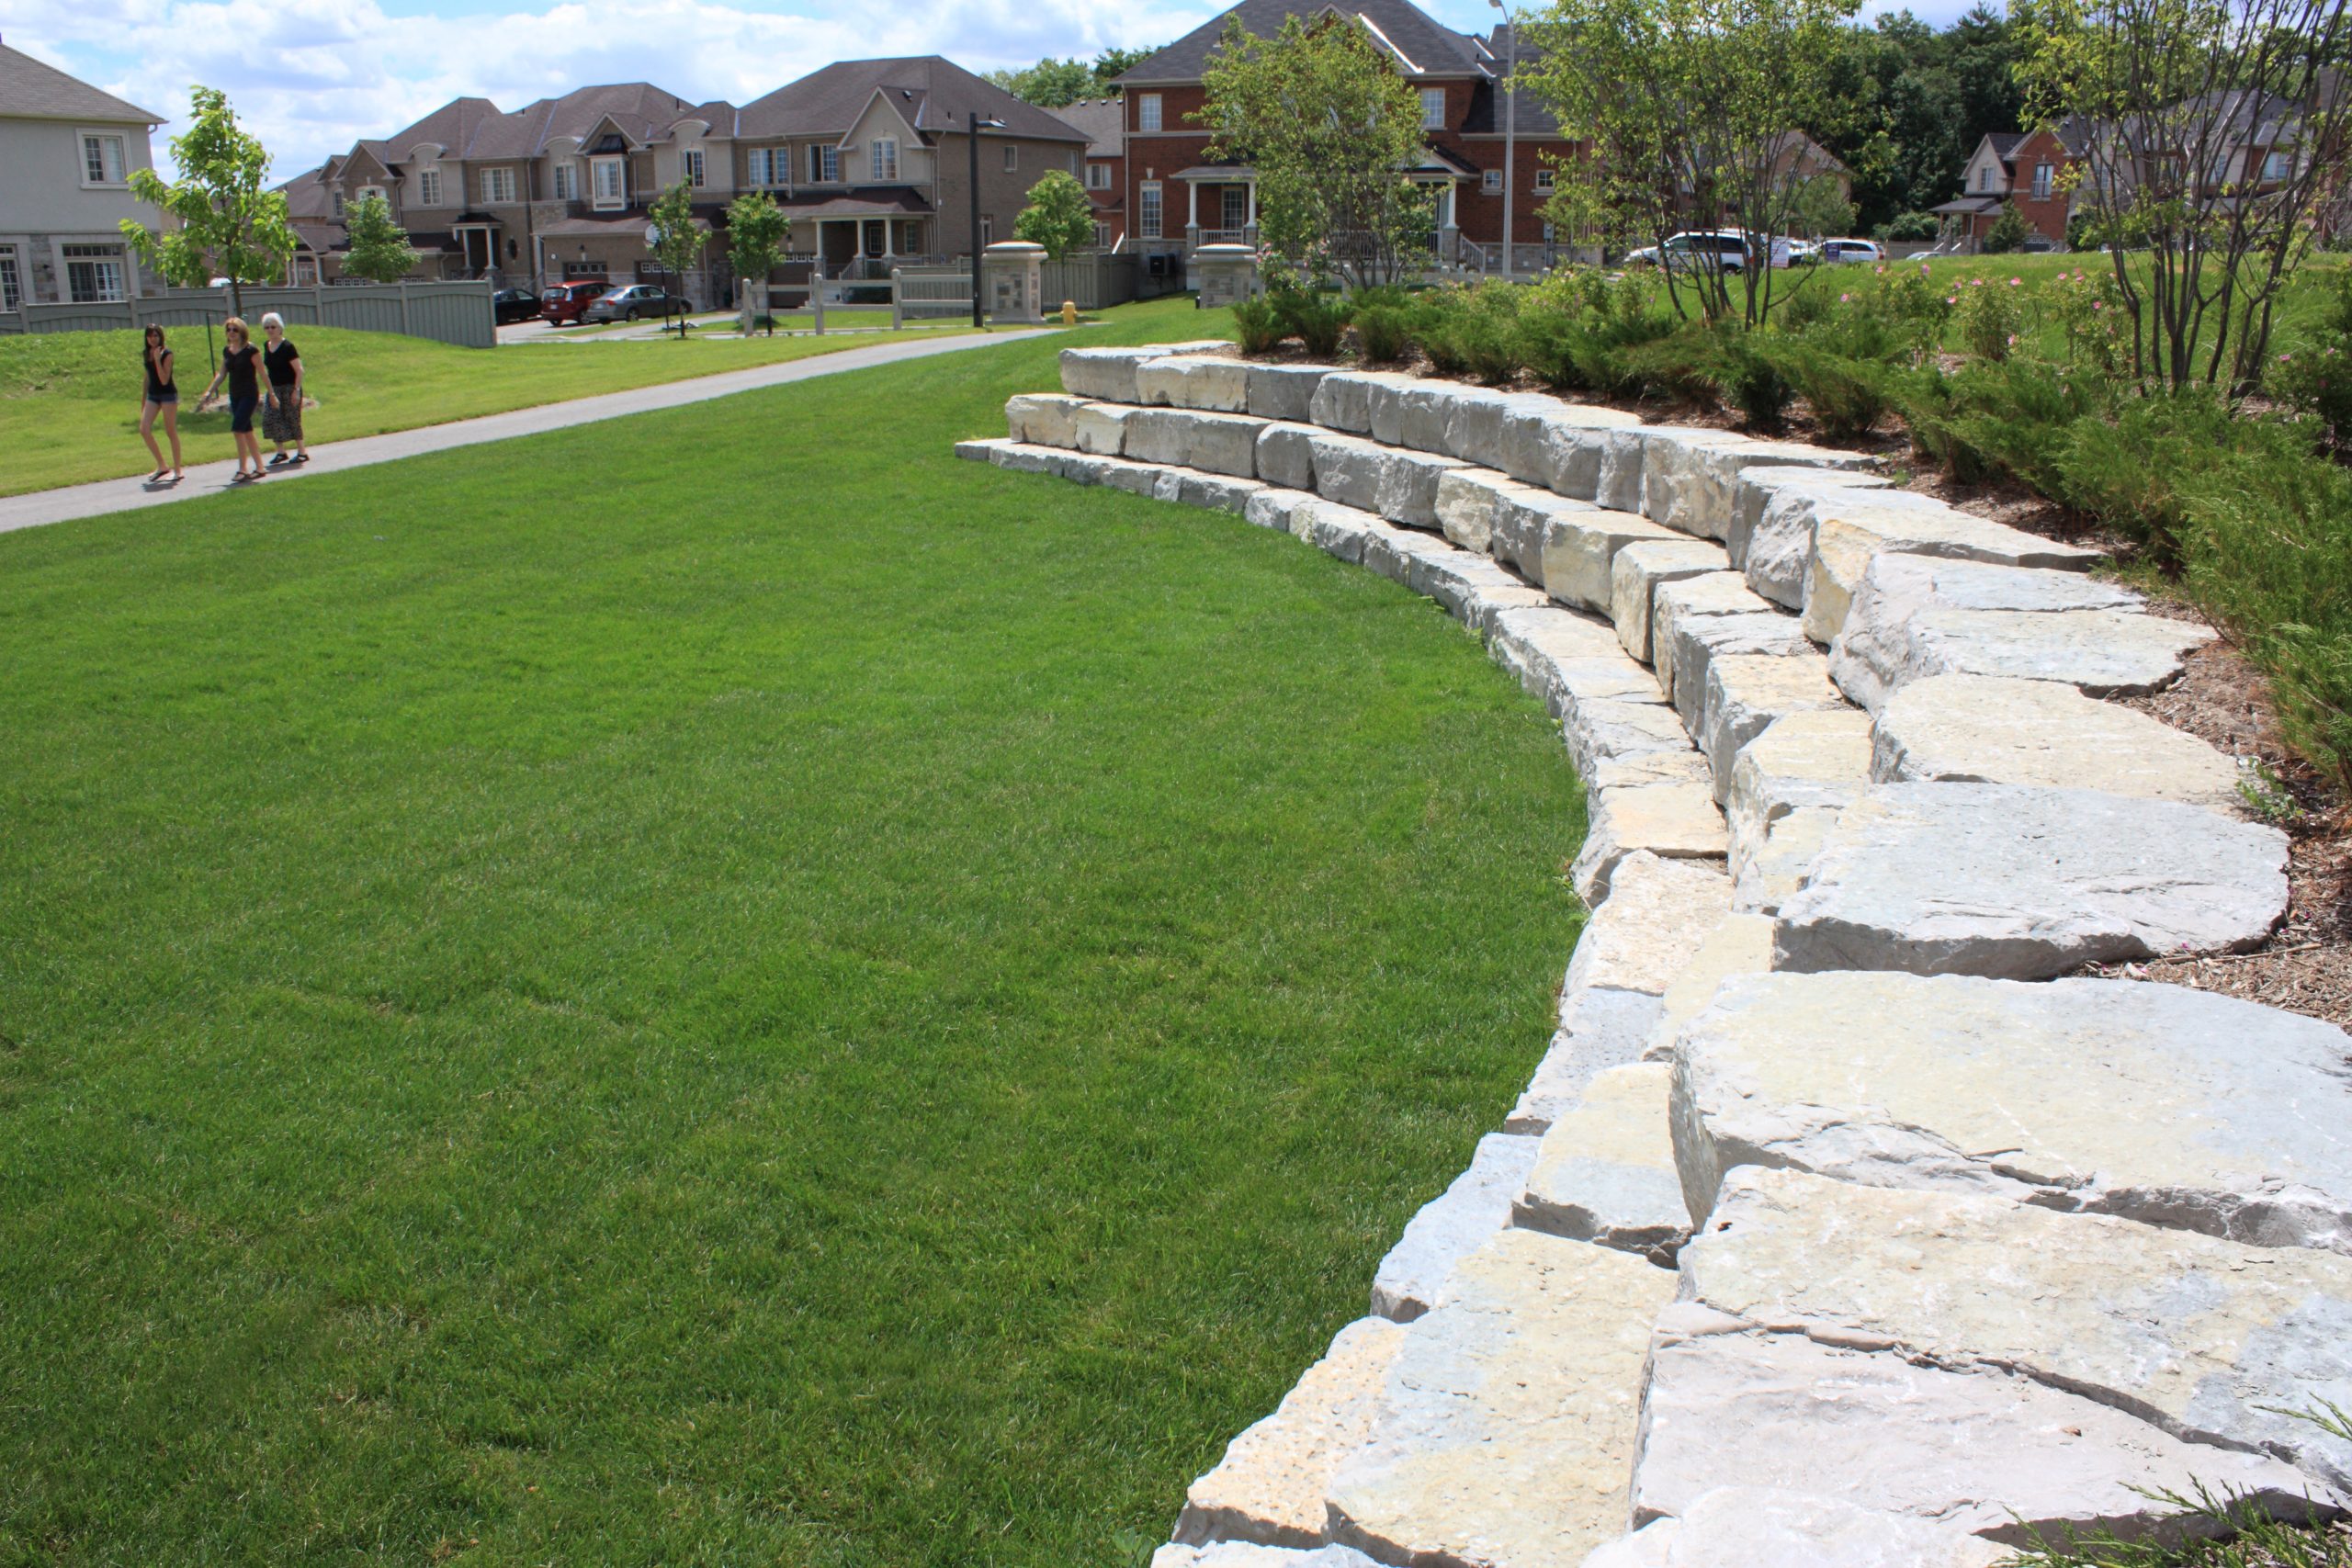 Large curved stone retainer wall.